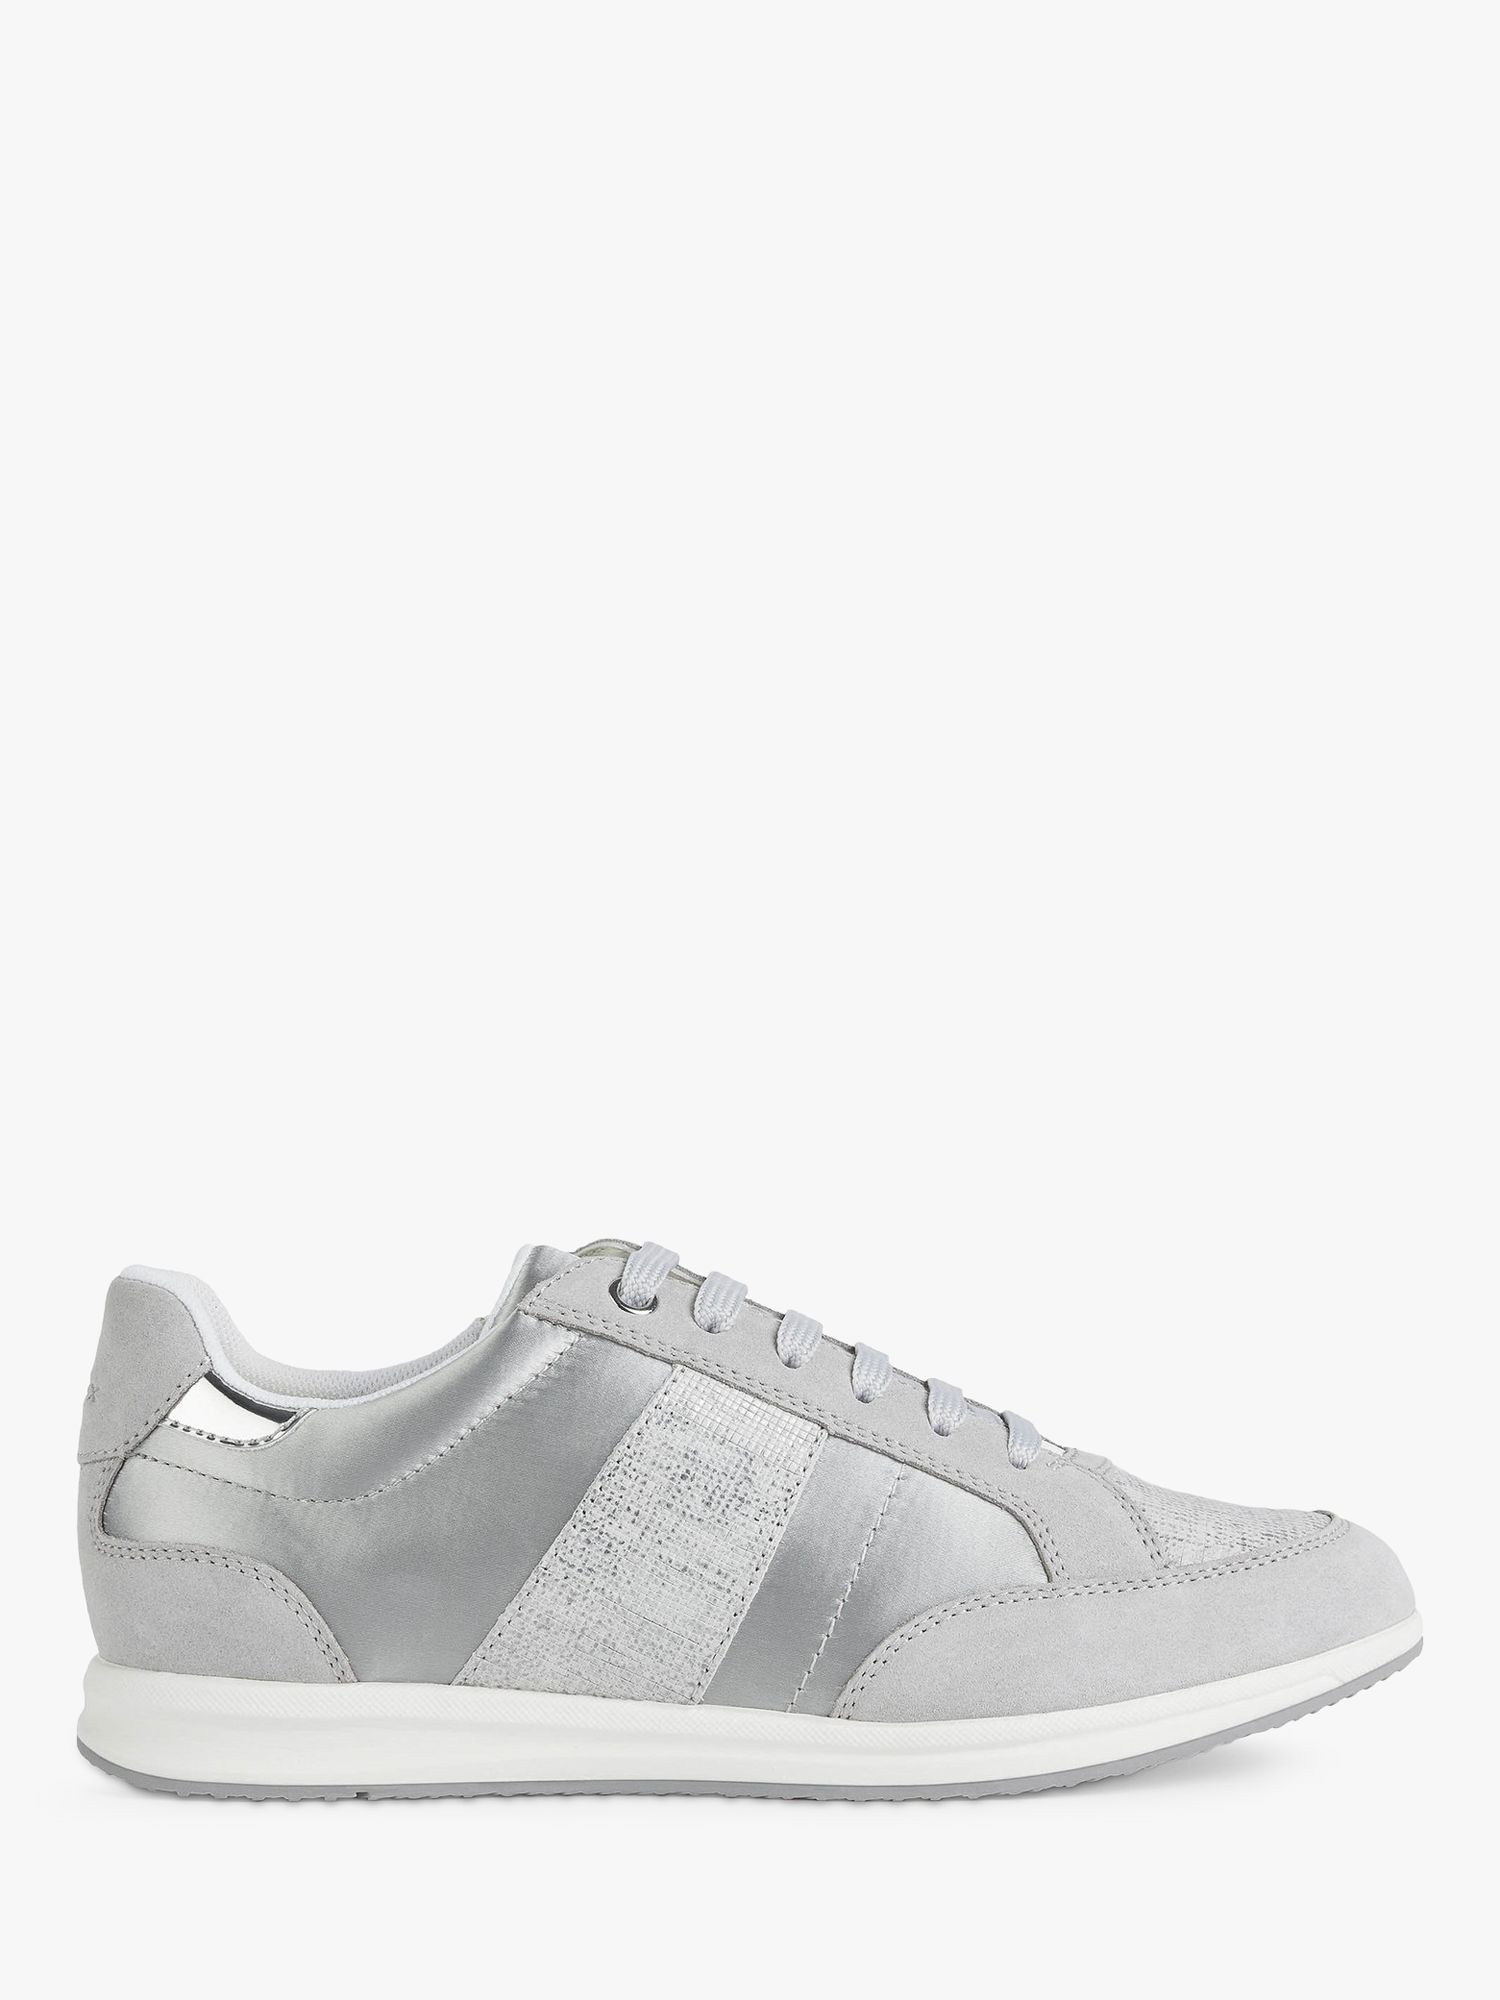 Geox Avery Wide Fit Zip Up Trainers at John Lewis & Partners